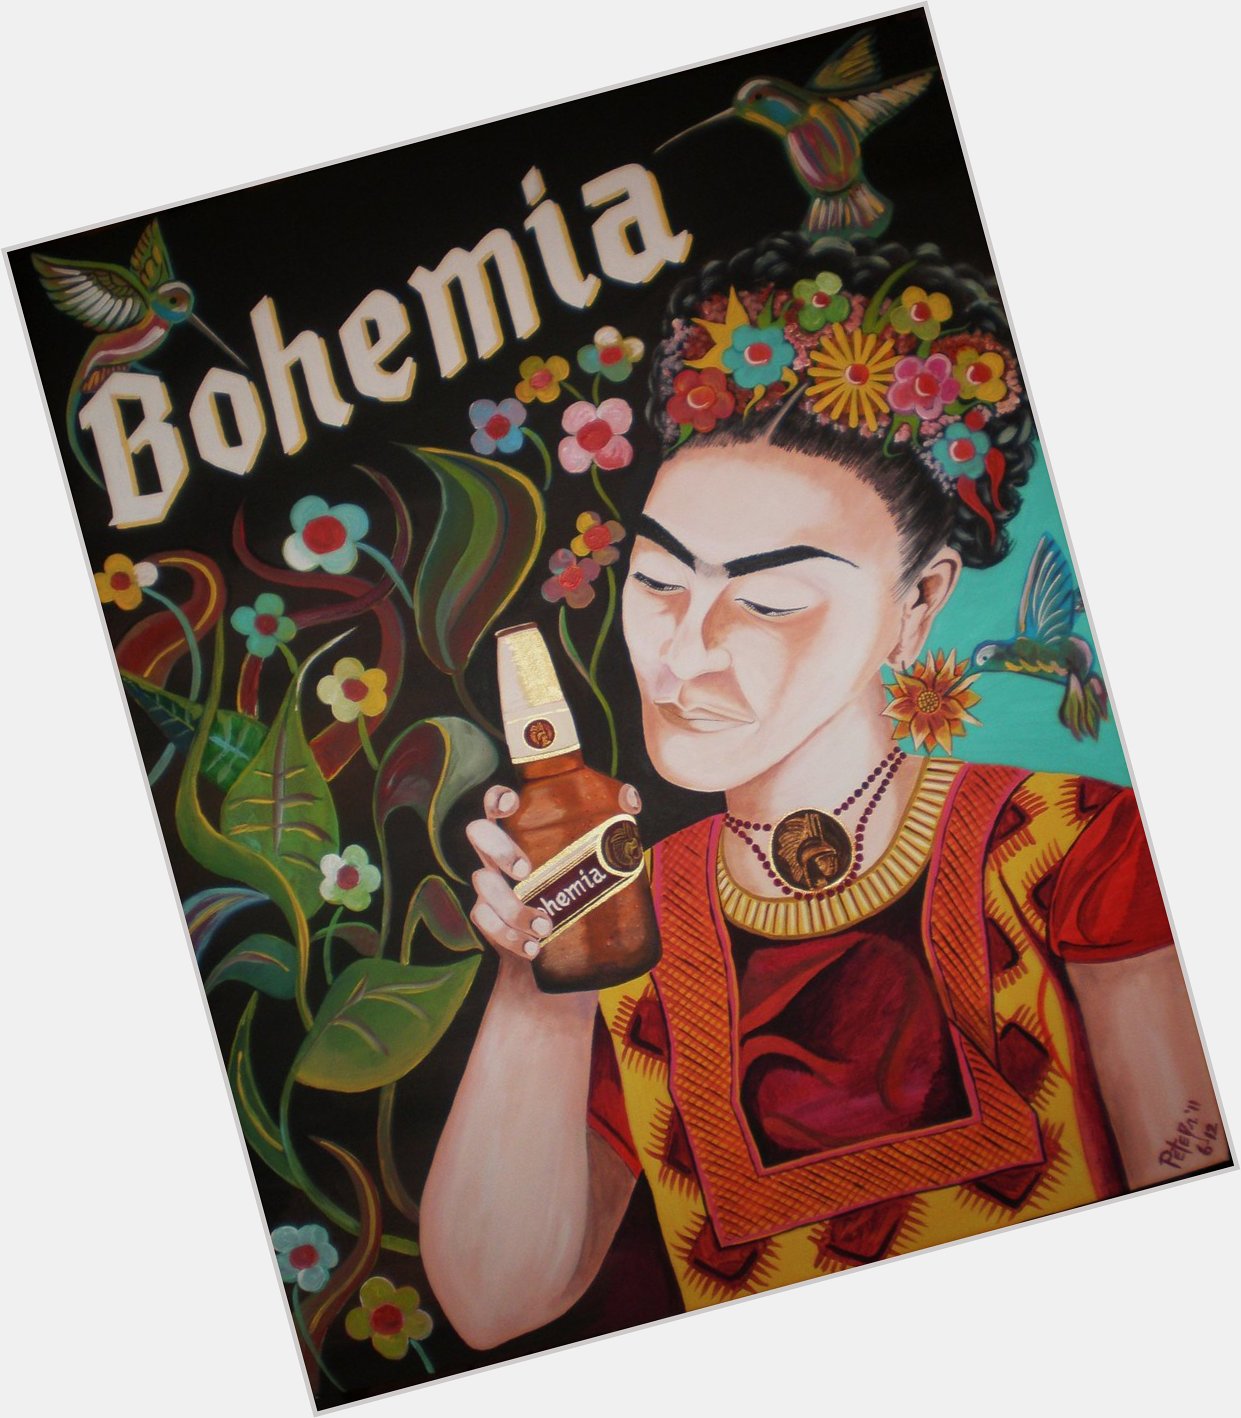 Happy Birthday Mexican painter Frida Kahlo (July 6, 1907 July 13, 1954) by Bohemia art contest winner Pete Rodriguez 